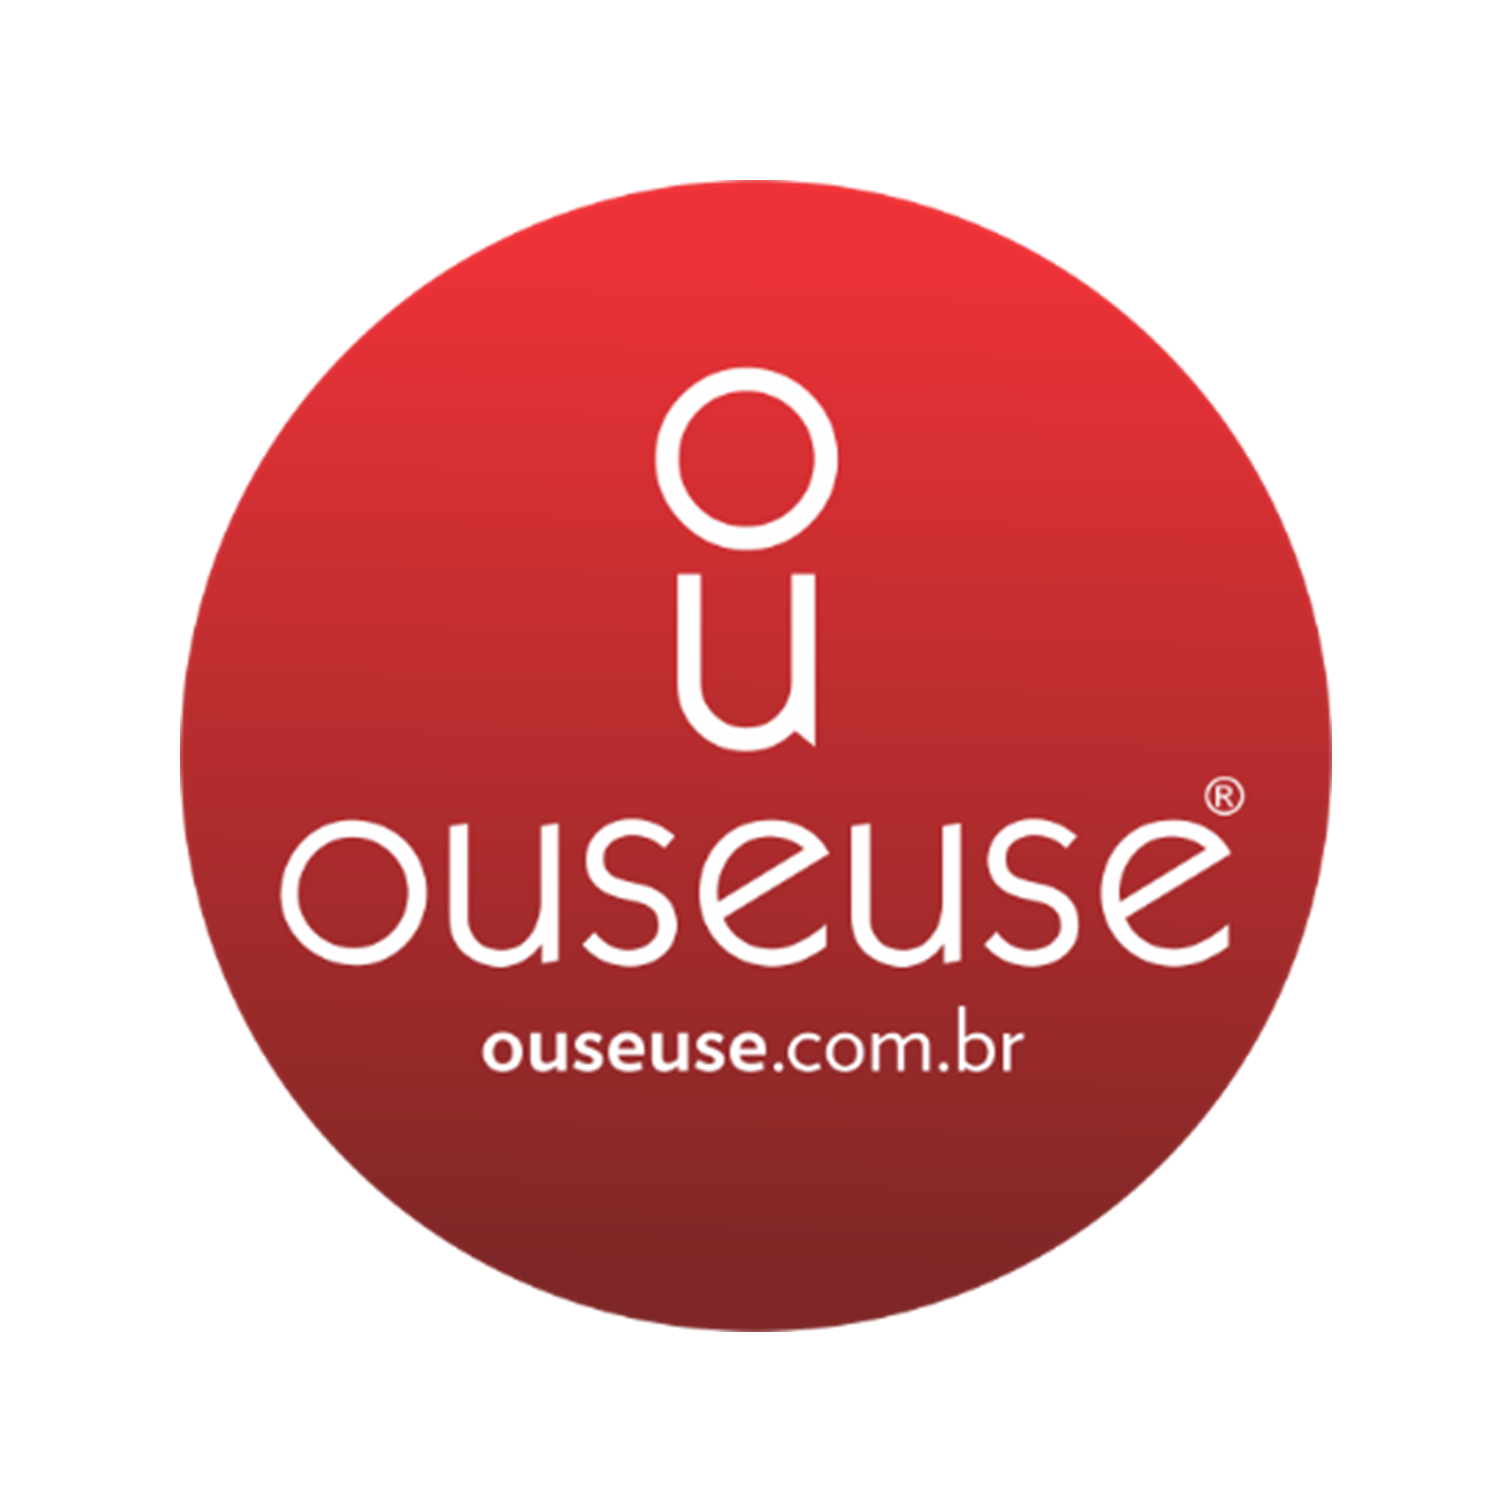 Ouseuse